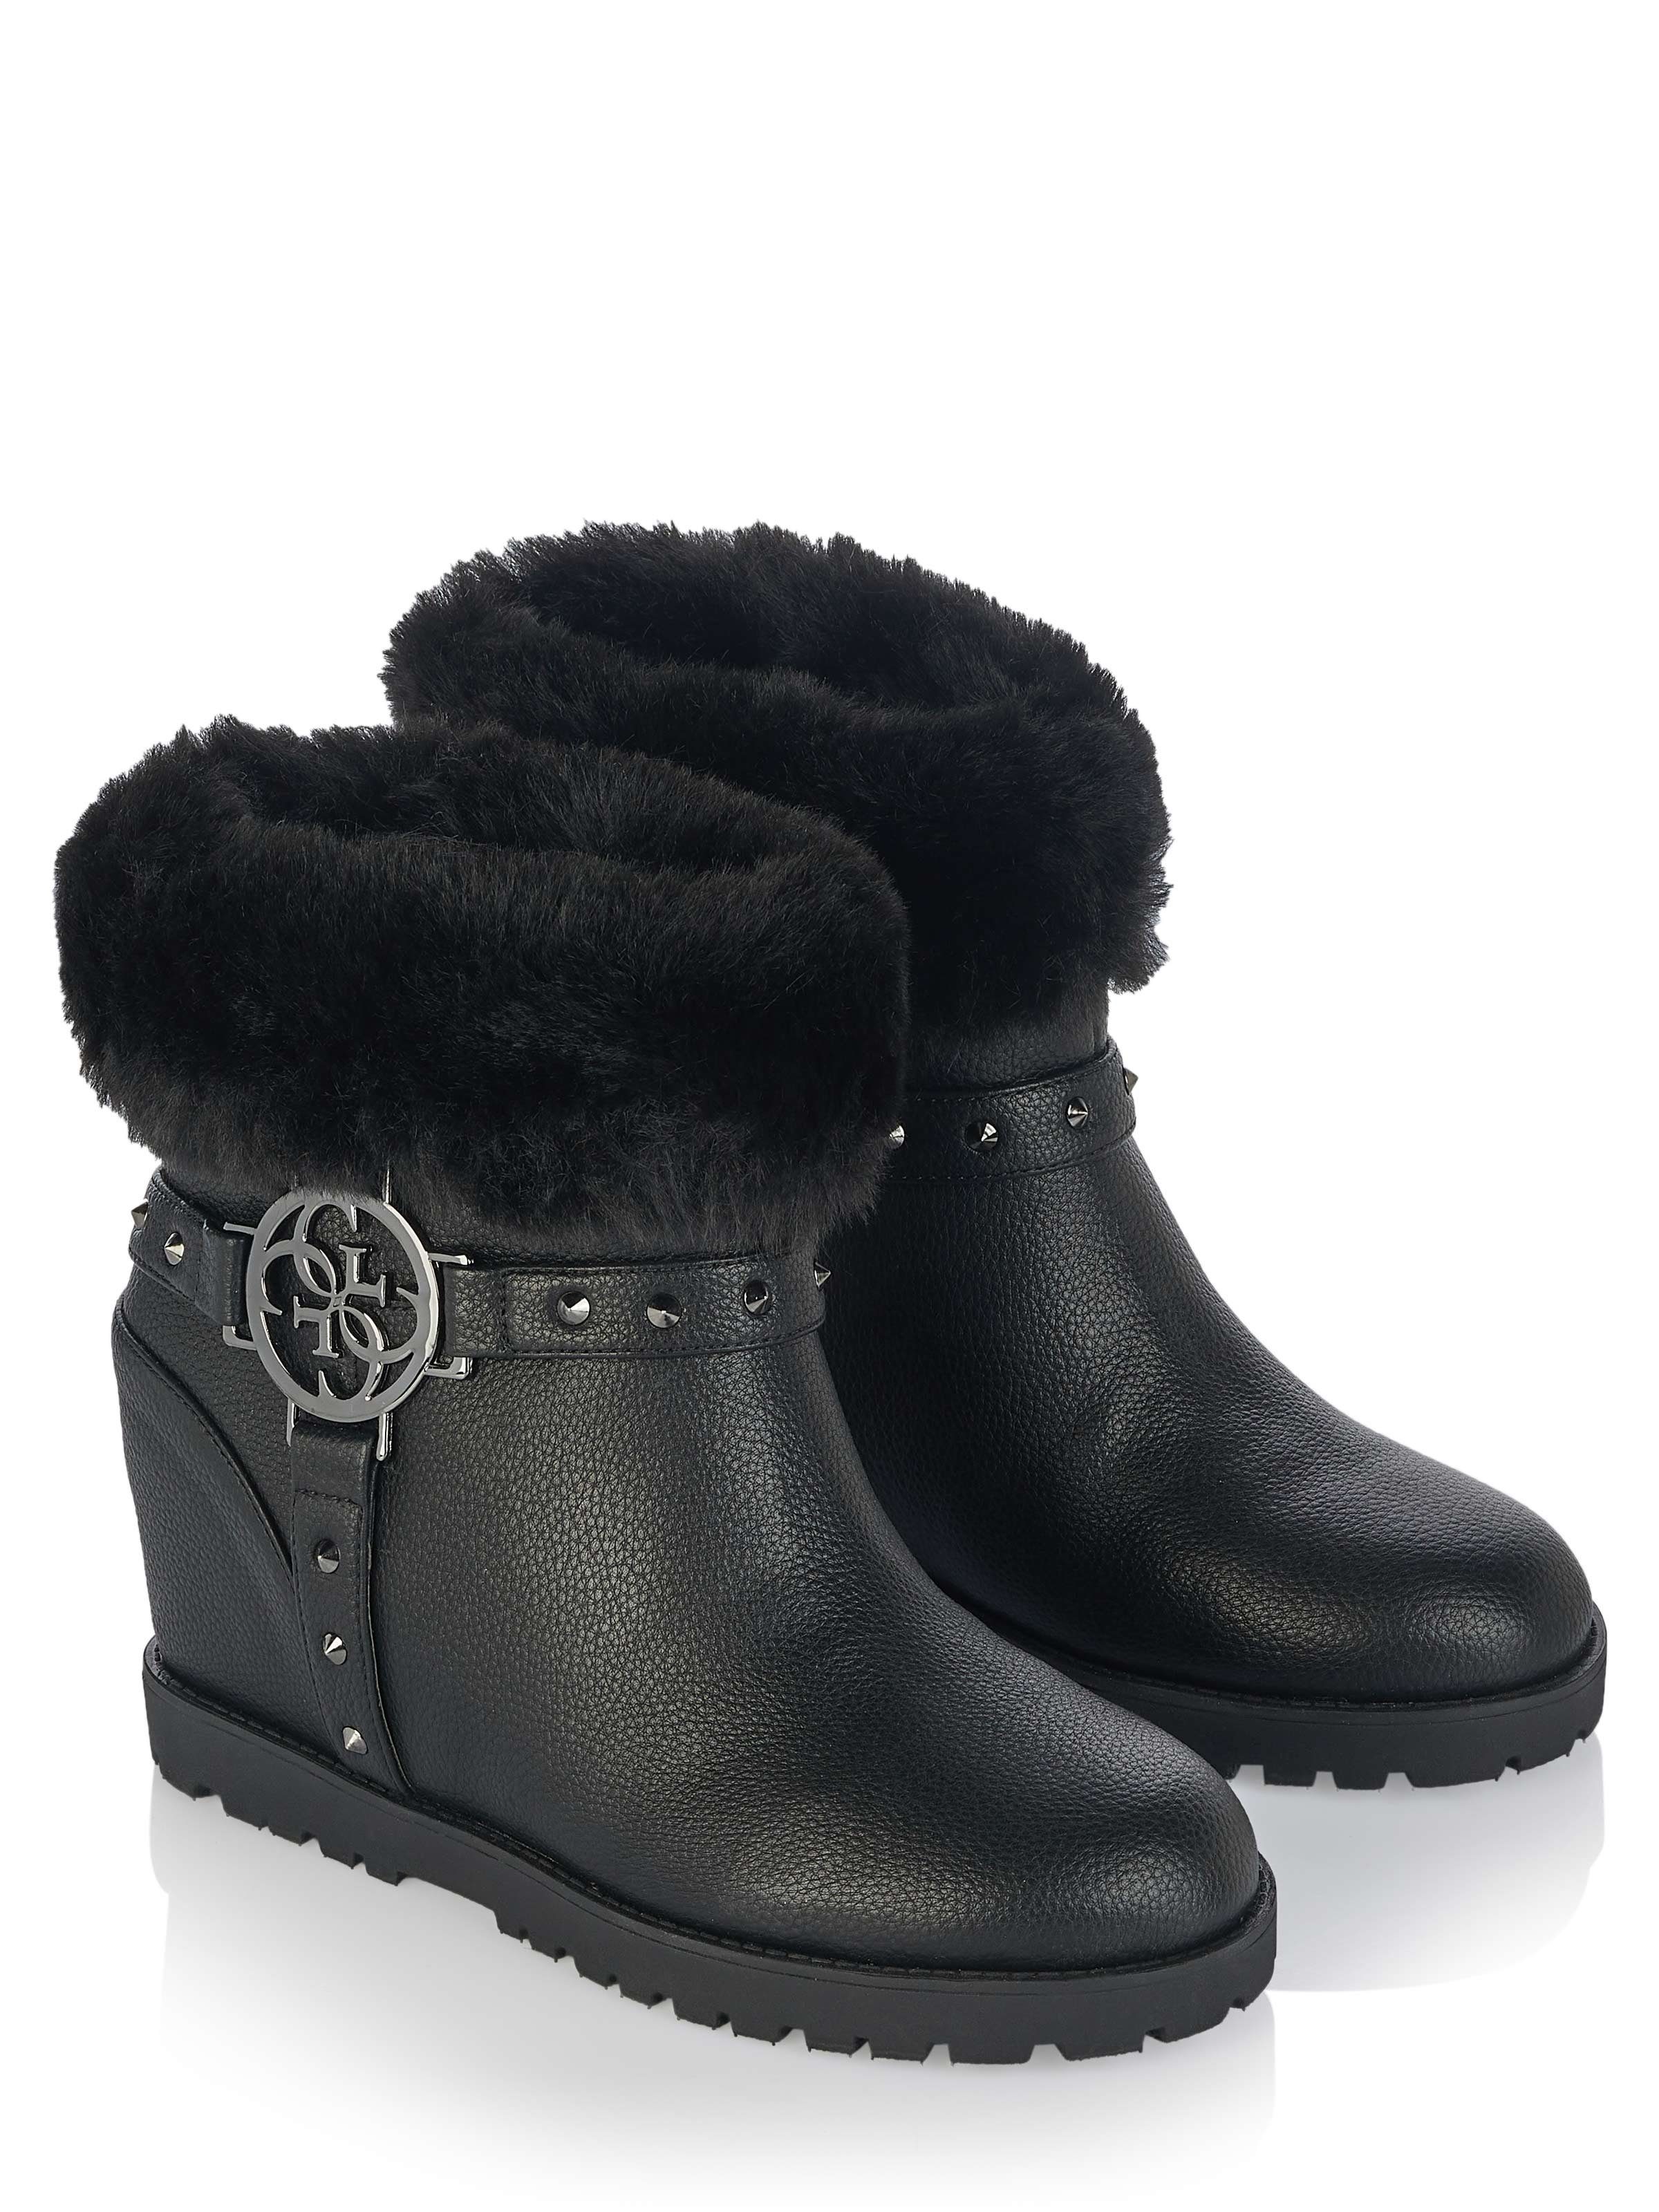 Guess Stiefel GUESS Ankleboots